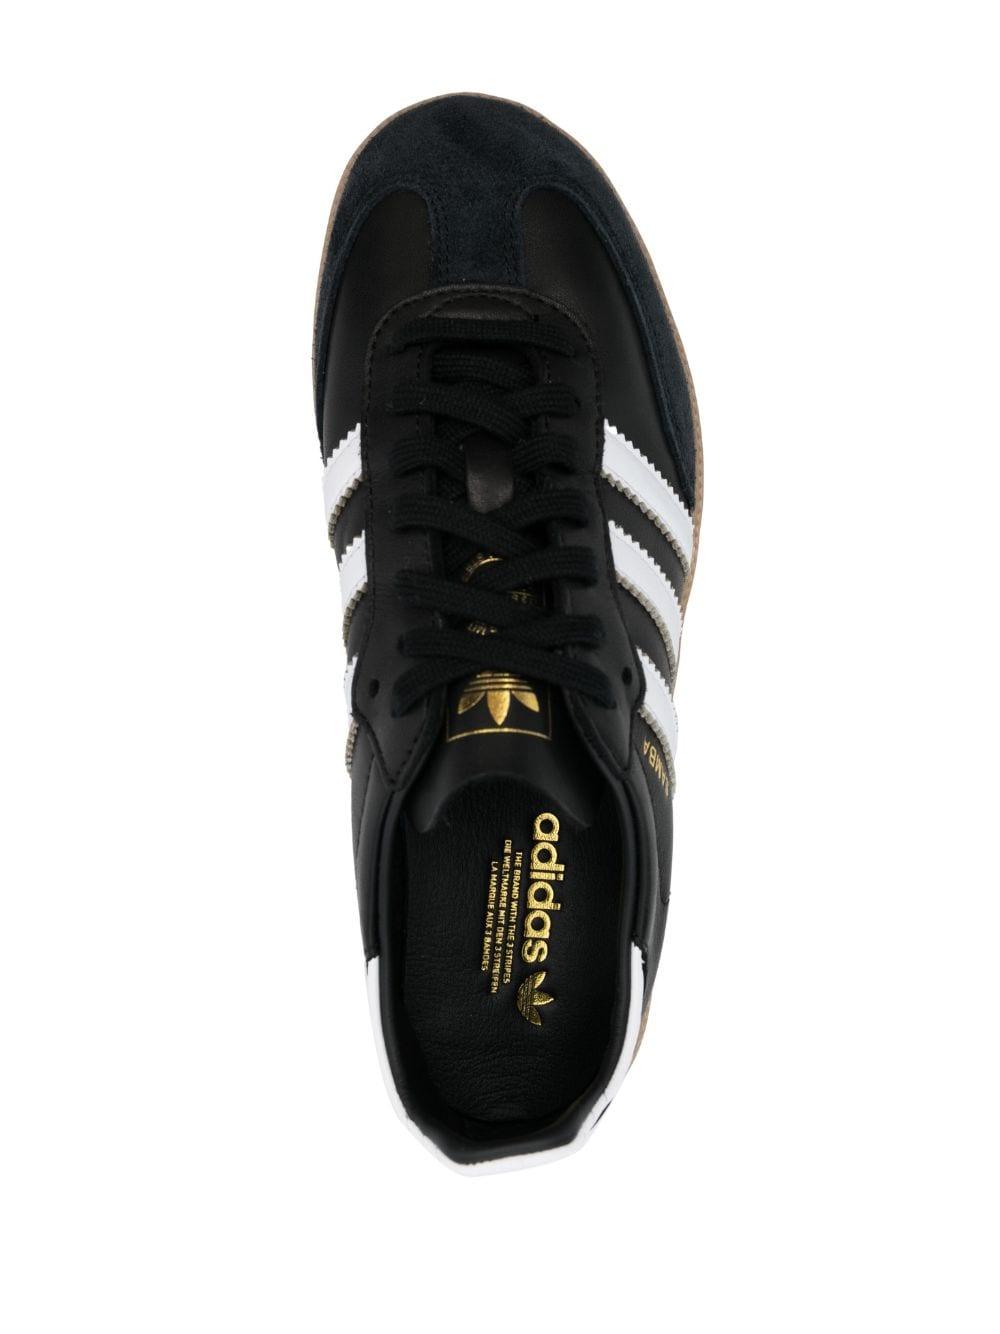 adidas Samba Leather Low-top Sneakers in Black | Lyst